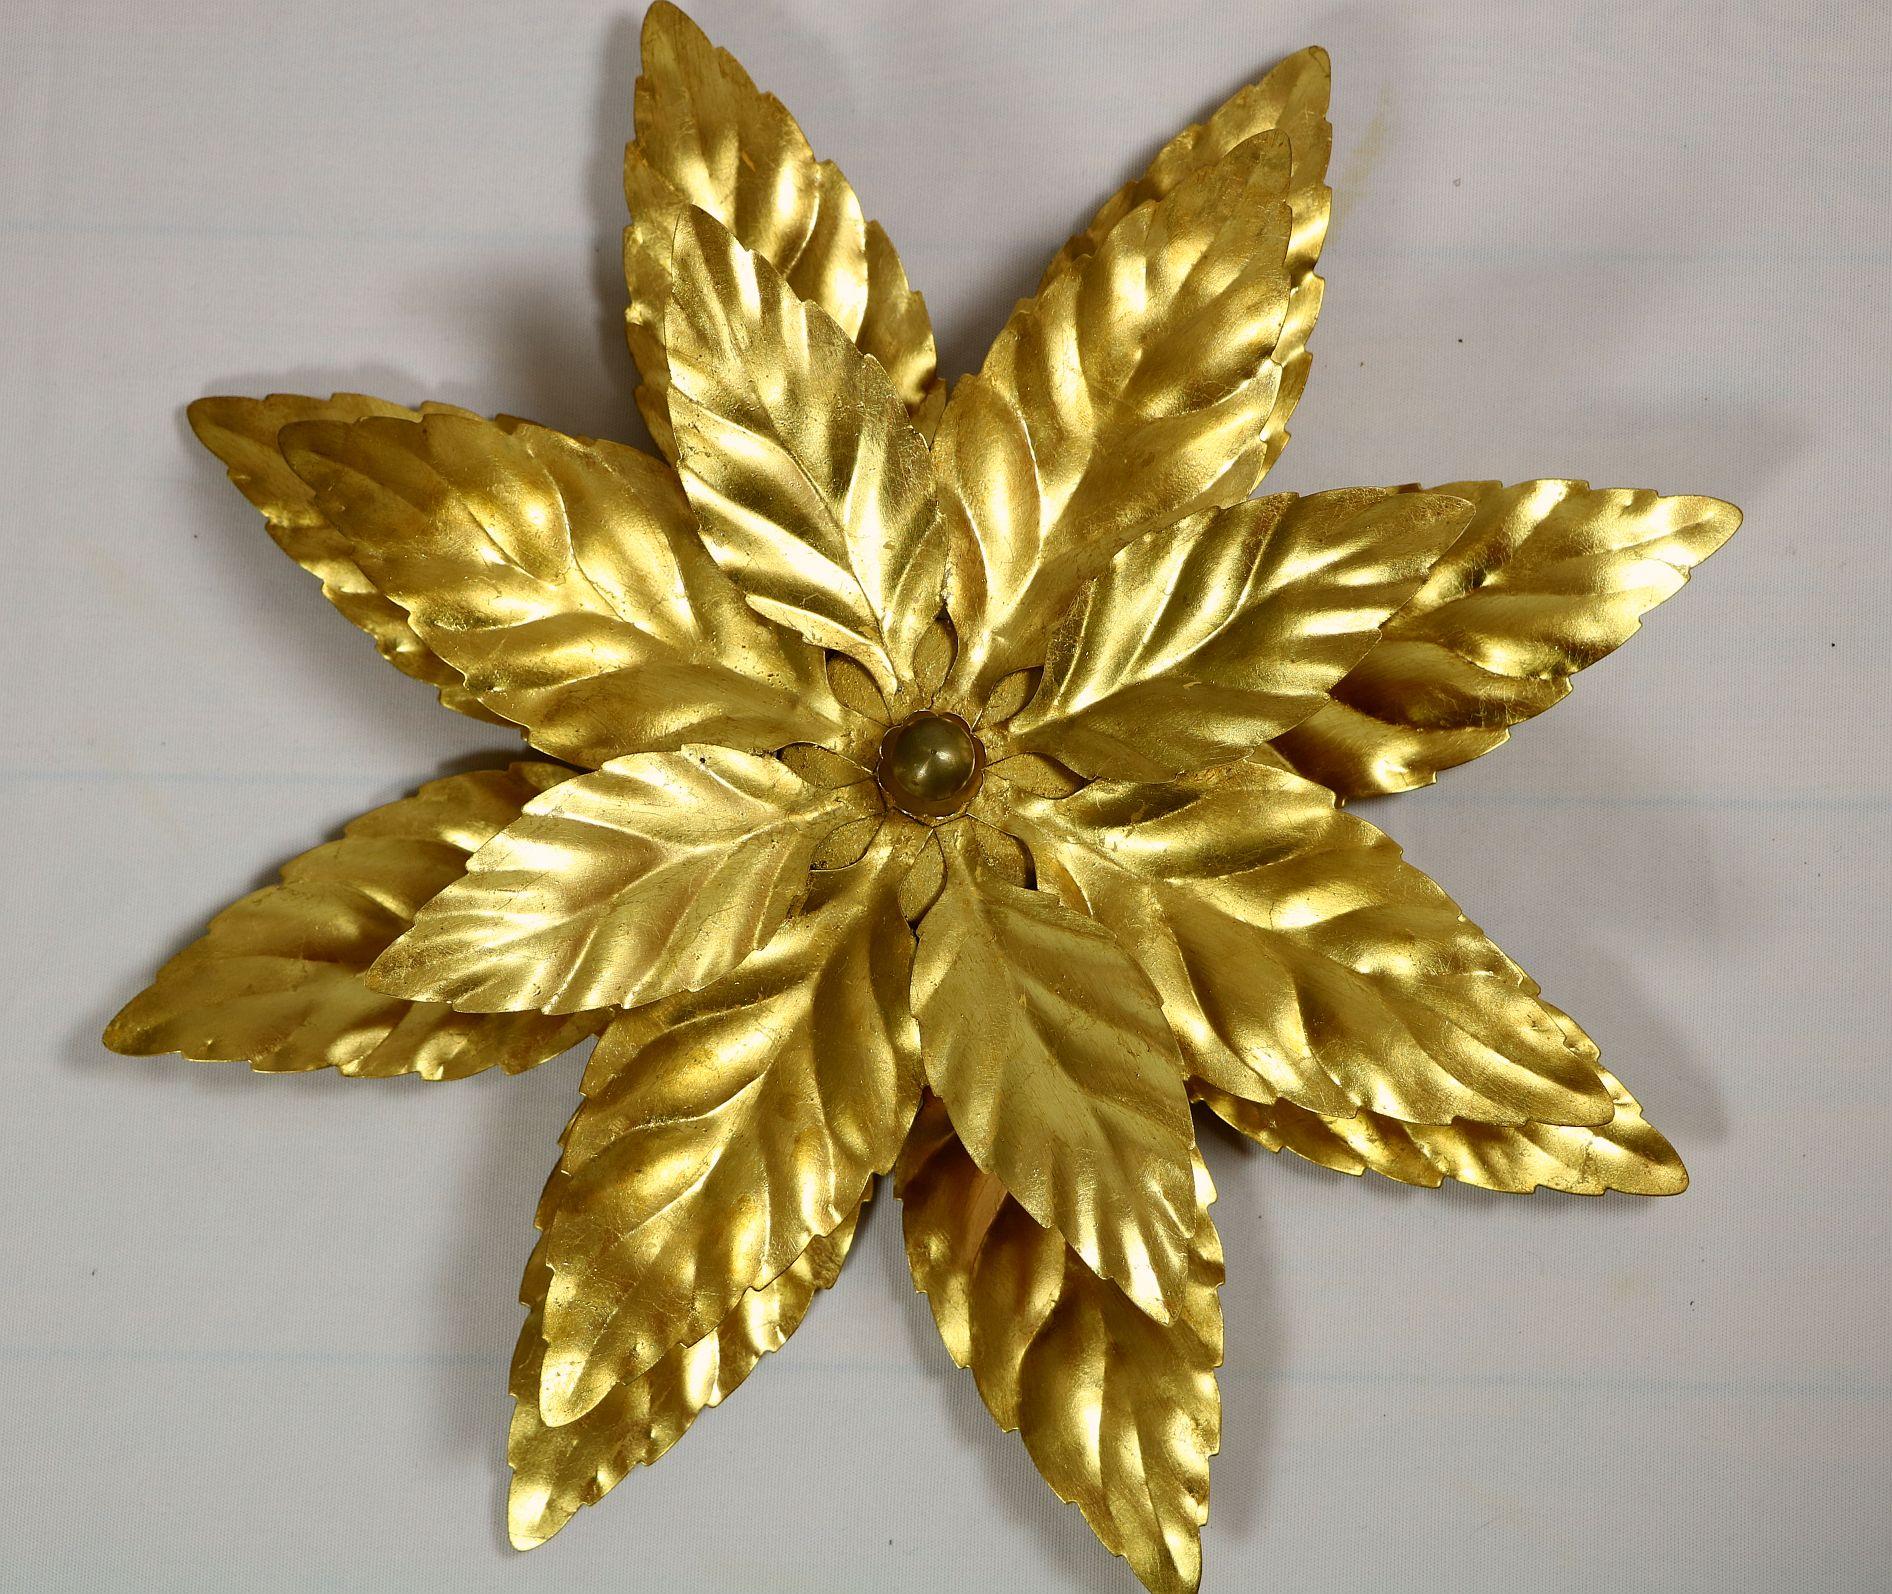 Beautiful wall lamp or ceiling lamp in the design of a flower or leaves.
Made of golden metal.
Sets a special accent in any room.

Through the 4 hidden bulbs the lamp makes a great indirect light-
From Germany.

Diameter: 45 cm / 17.7 inch
Height: